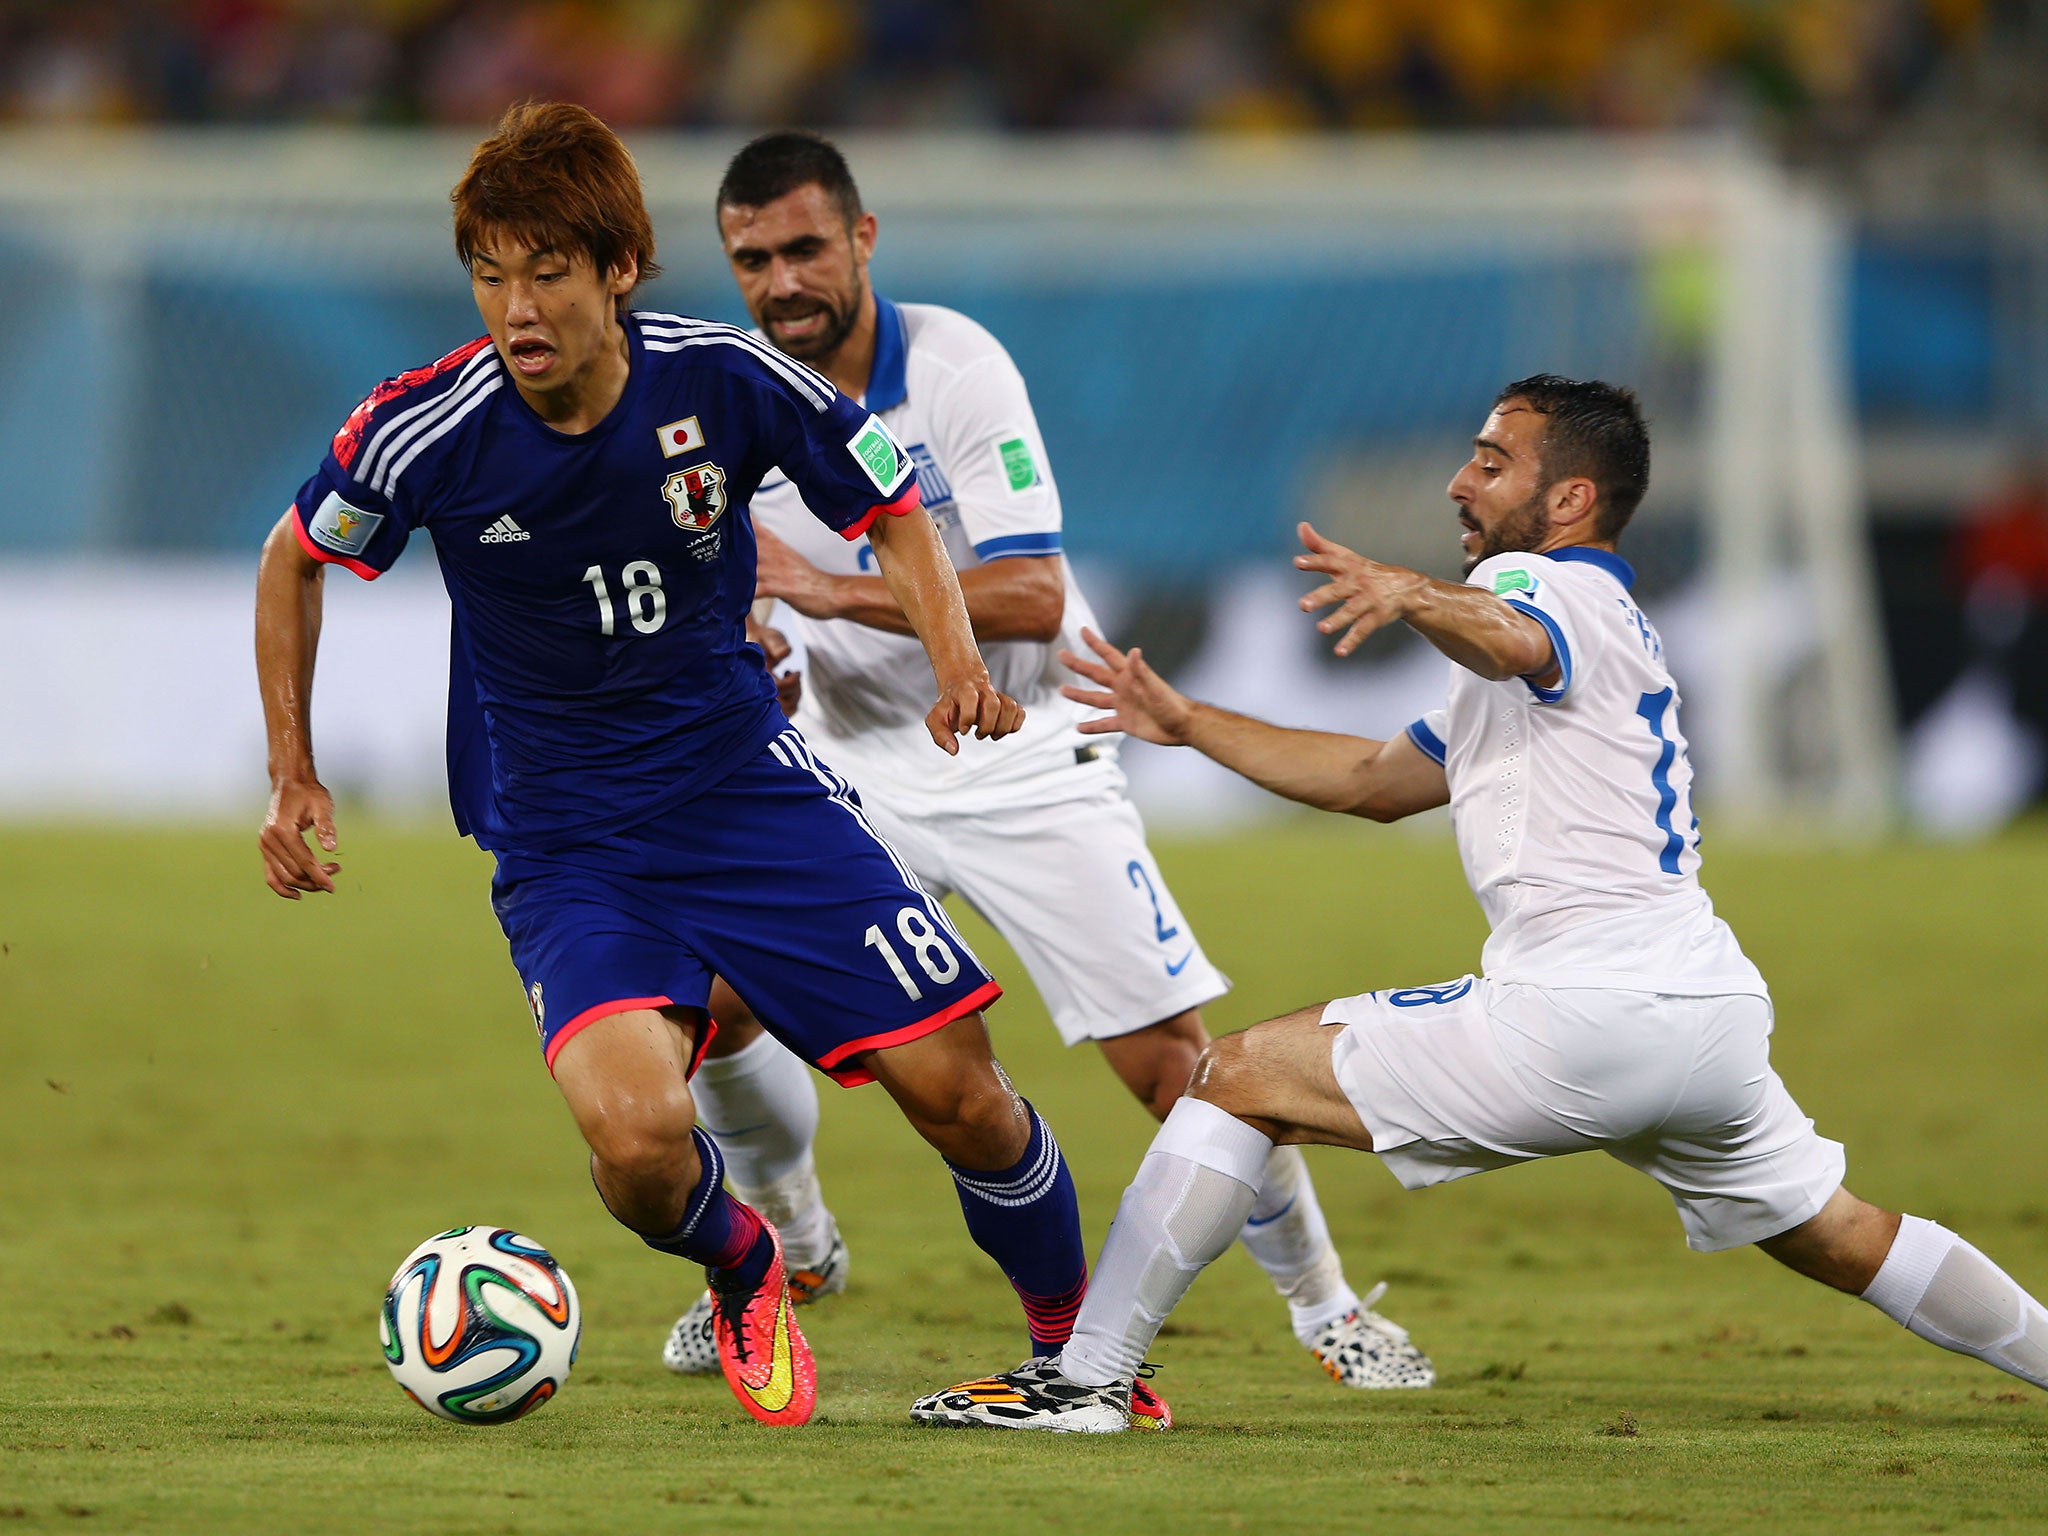 Yuya Osako: Failed to trouble a resolute Greek defence, and eventually subbed. 5